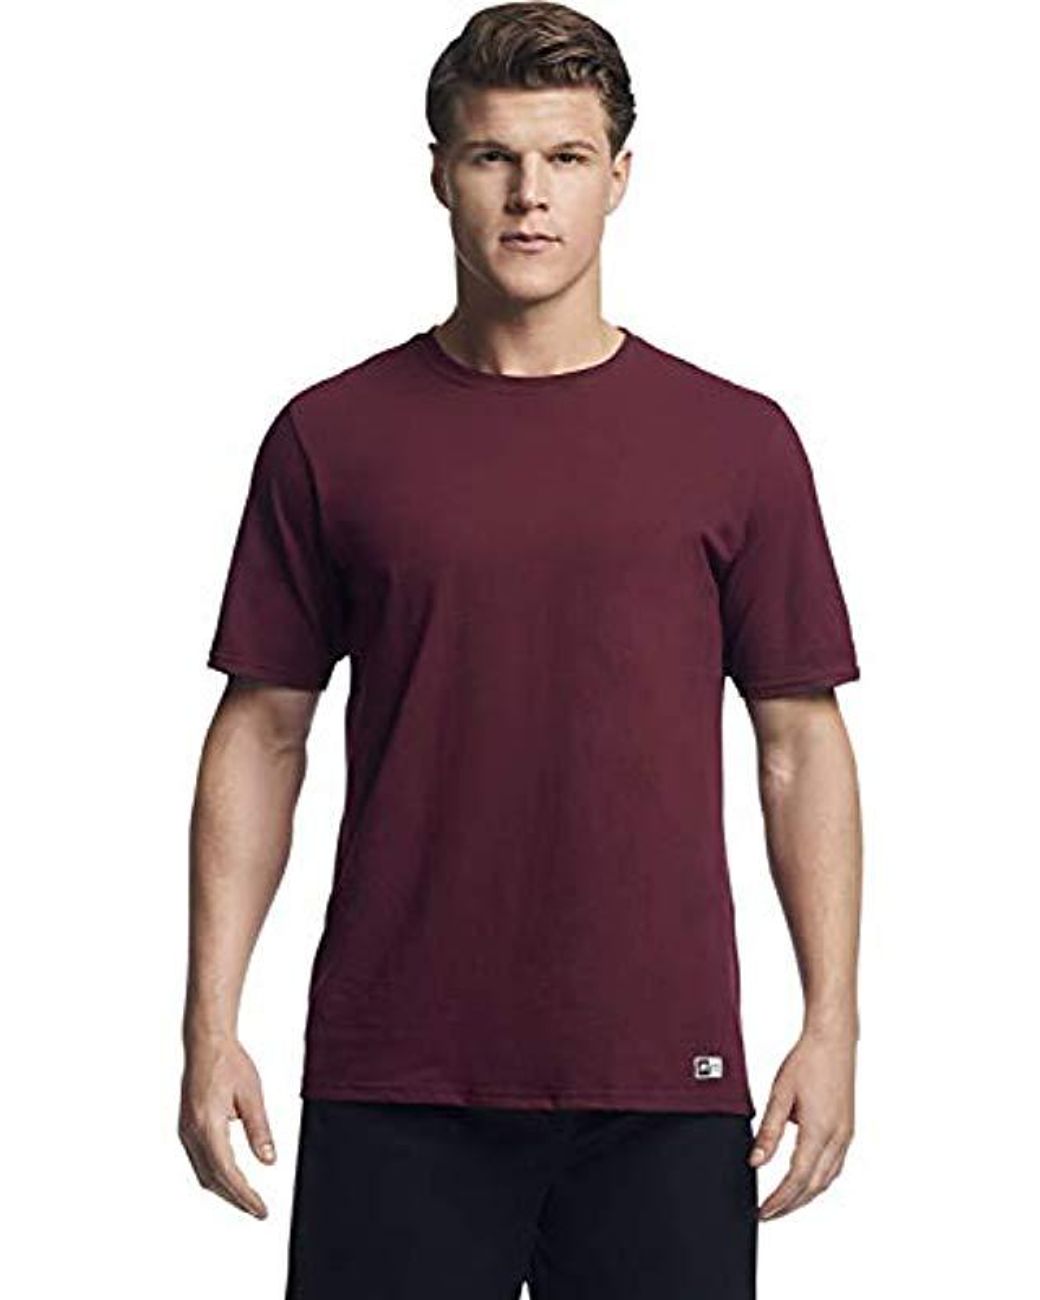 Russell Athletic Cotton Performance Short Sleeve T-shirt in Maroon (Red ...